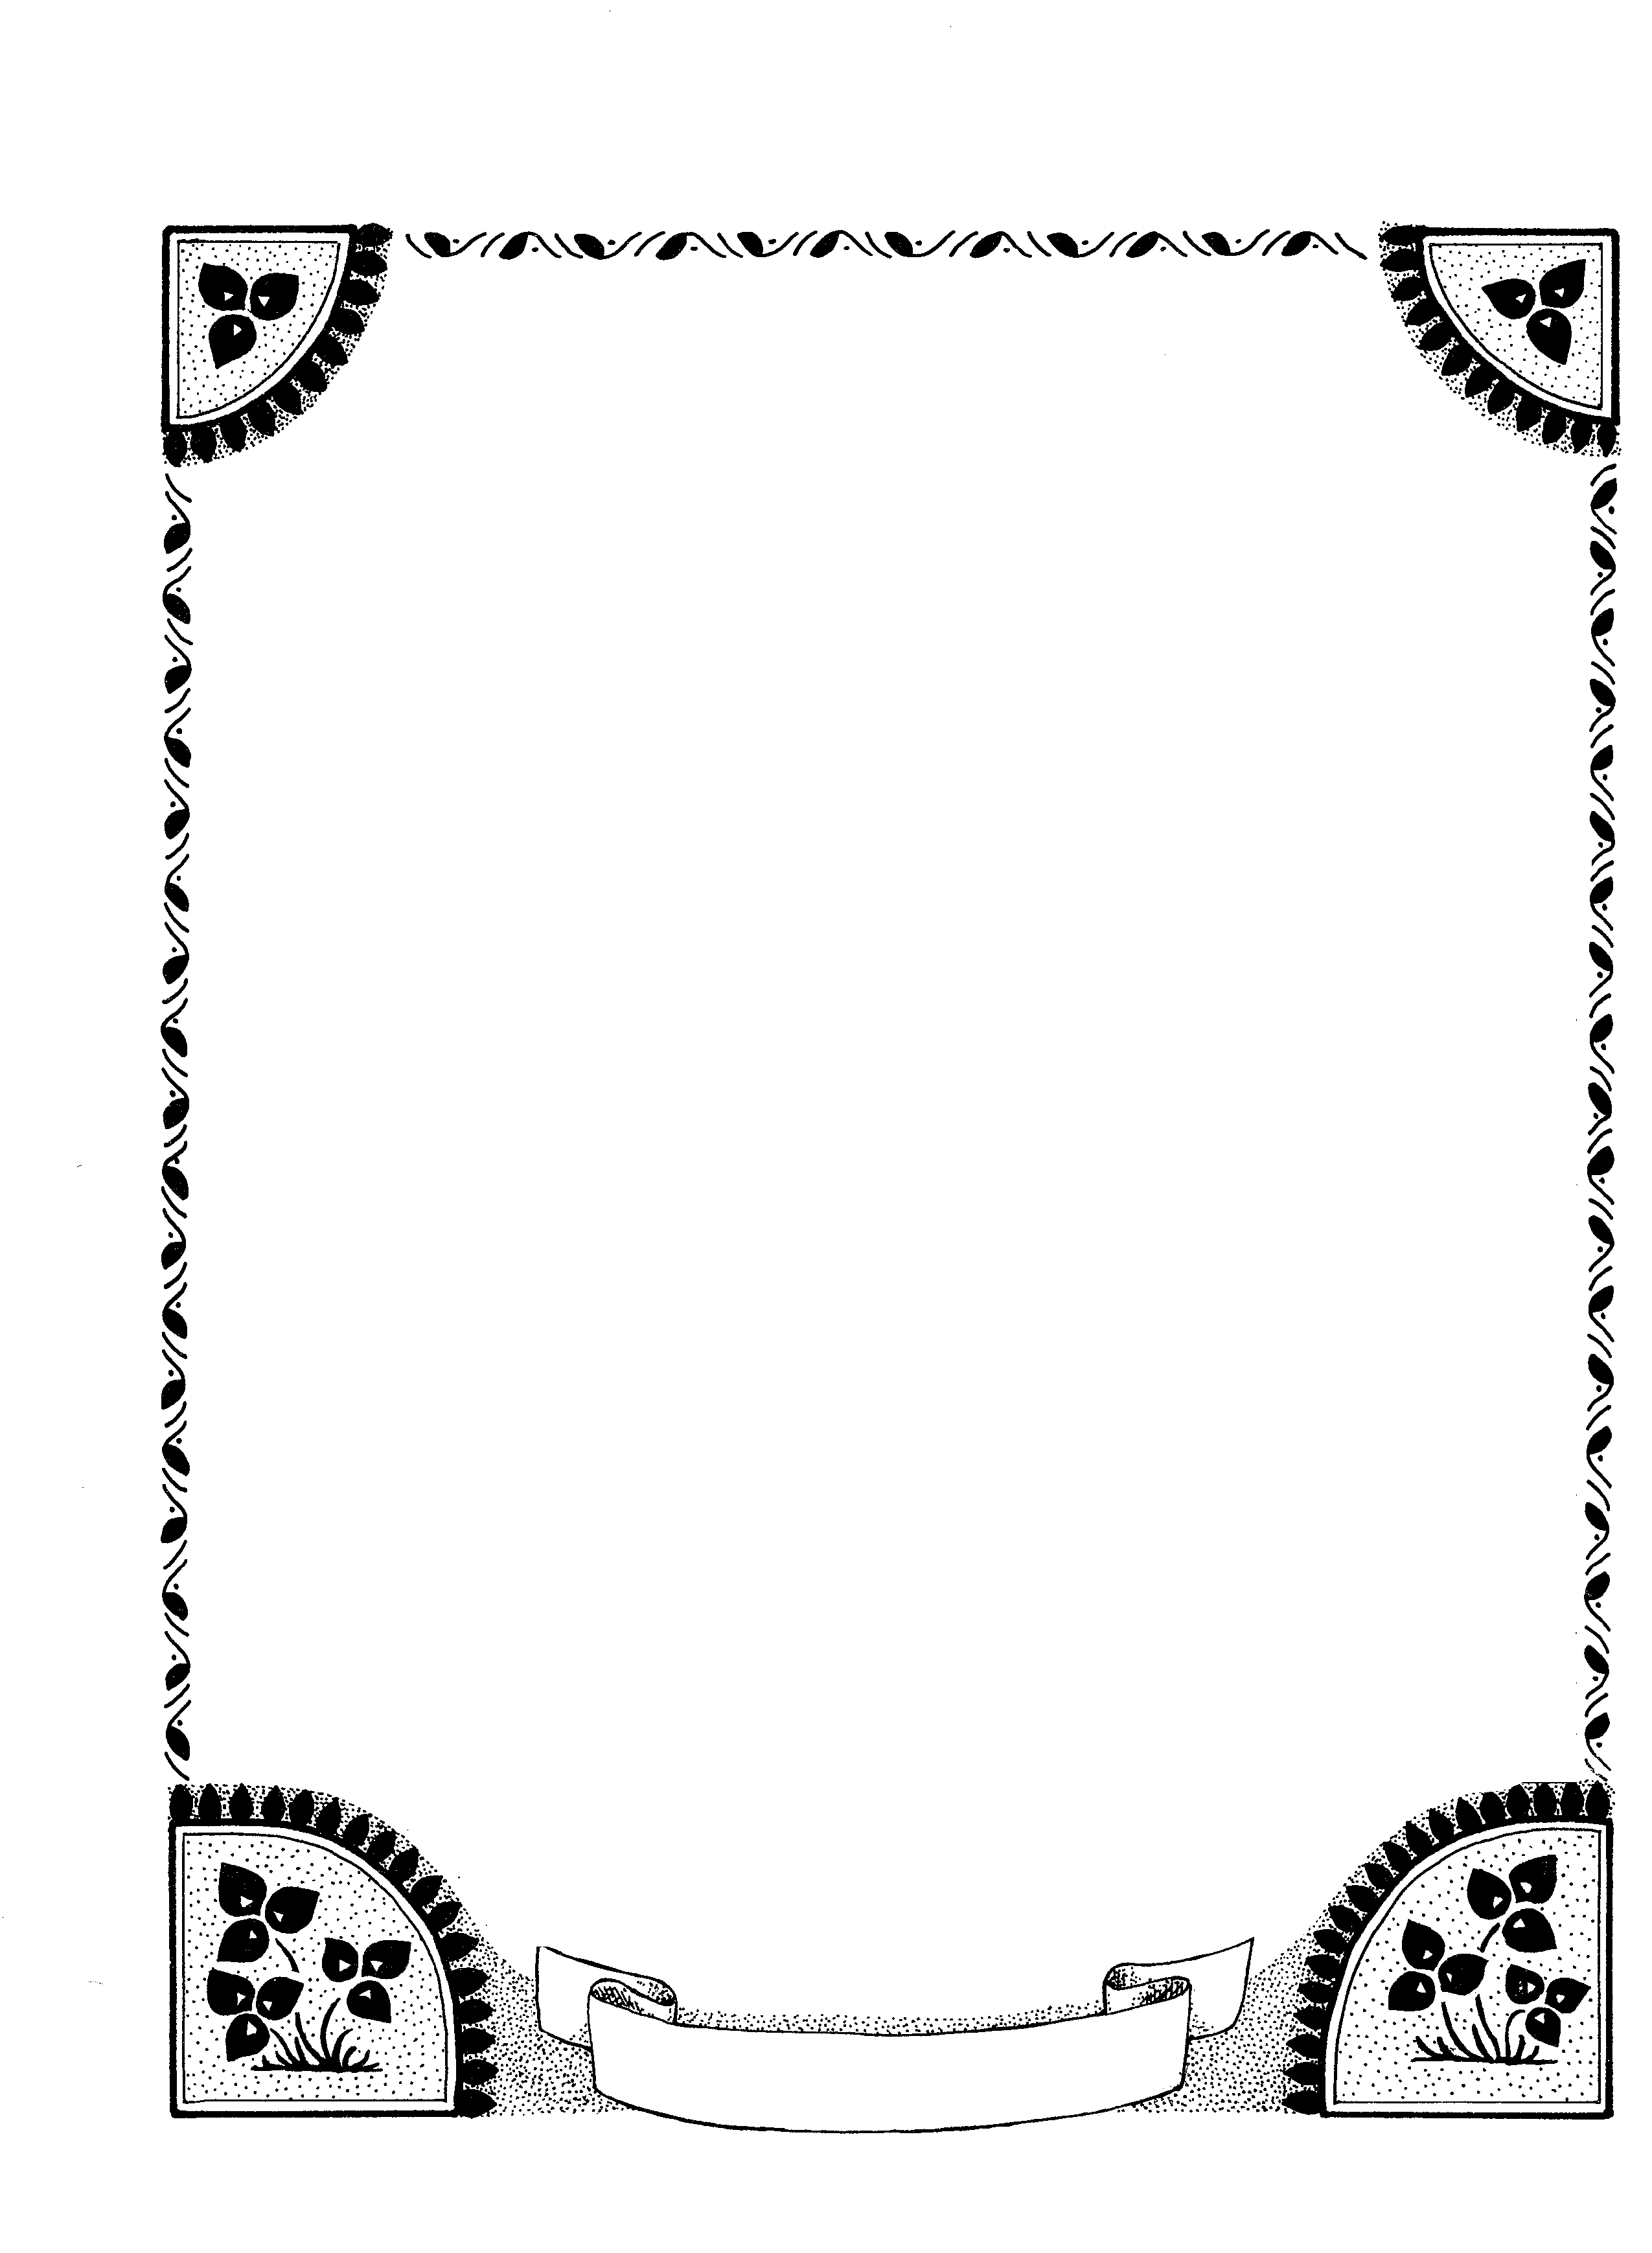 free-black-and-white-page-borders-download-free-black-and-white-page